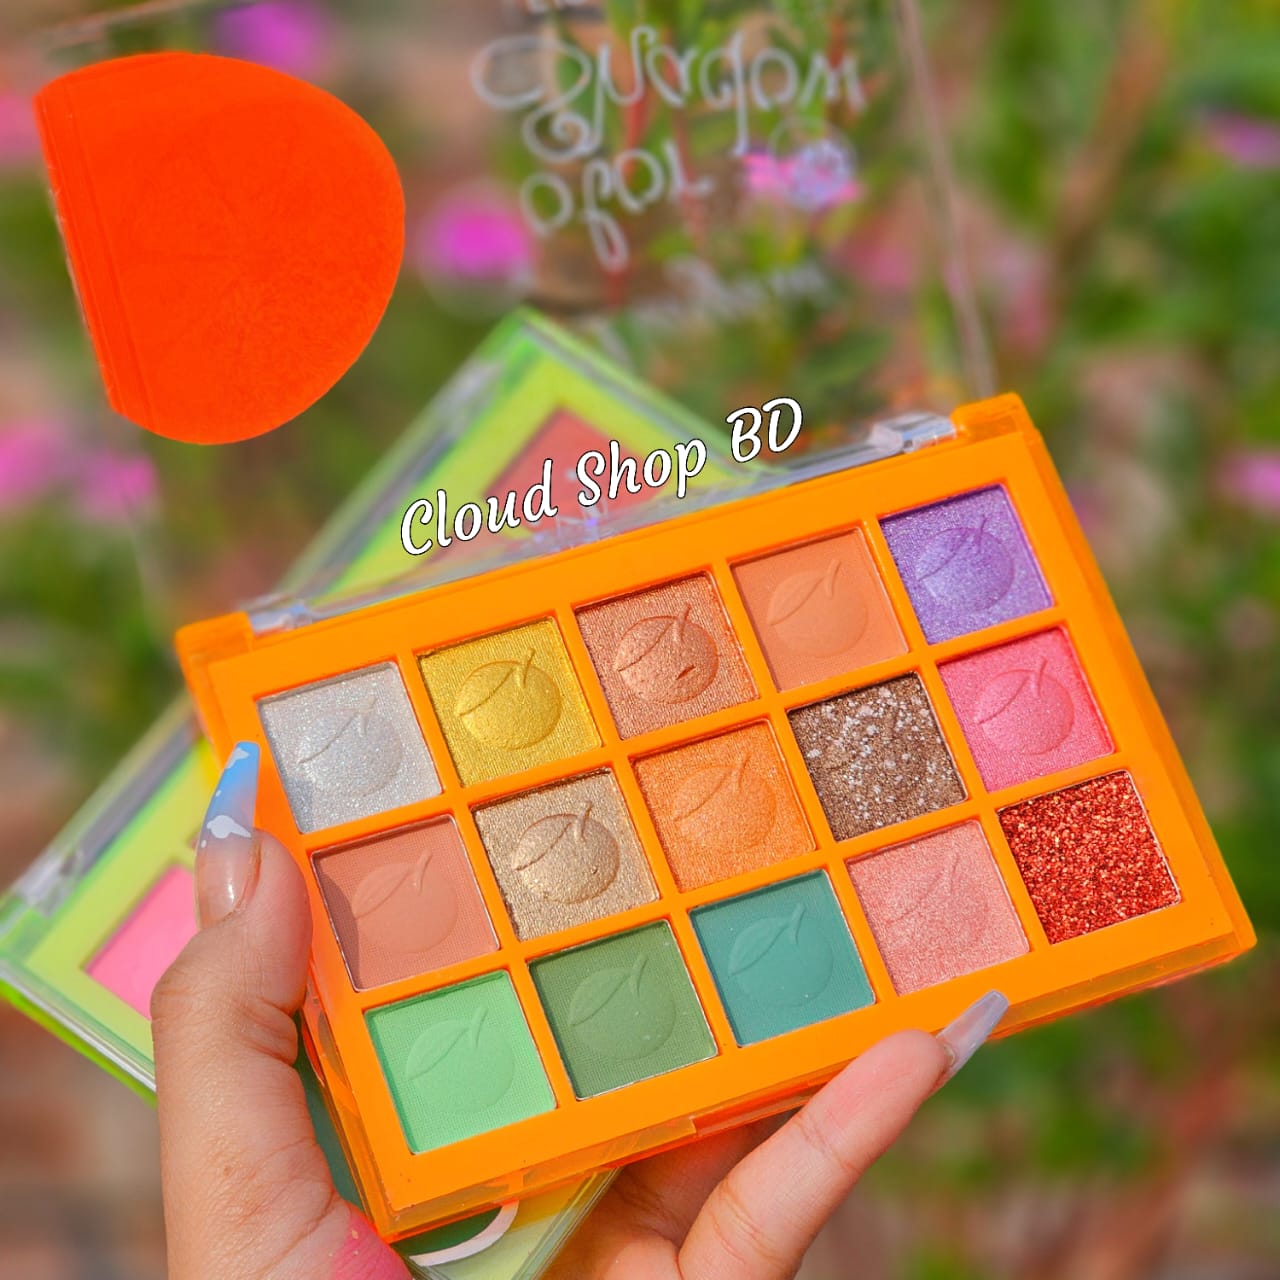 Buy Luyisi 15 Color Eyeshadow Palette Online From 